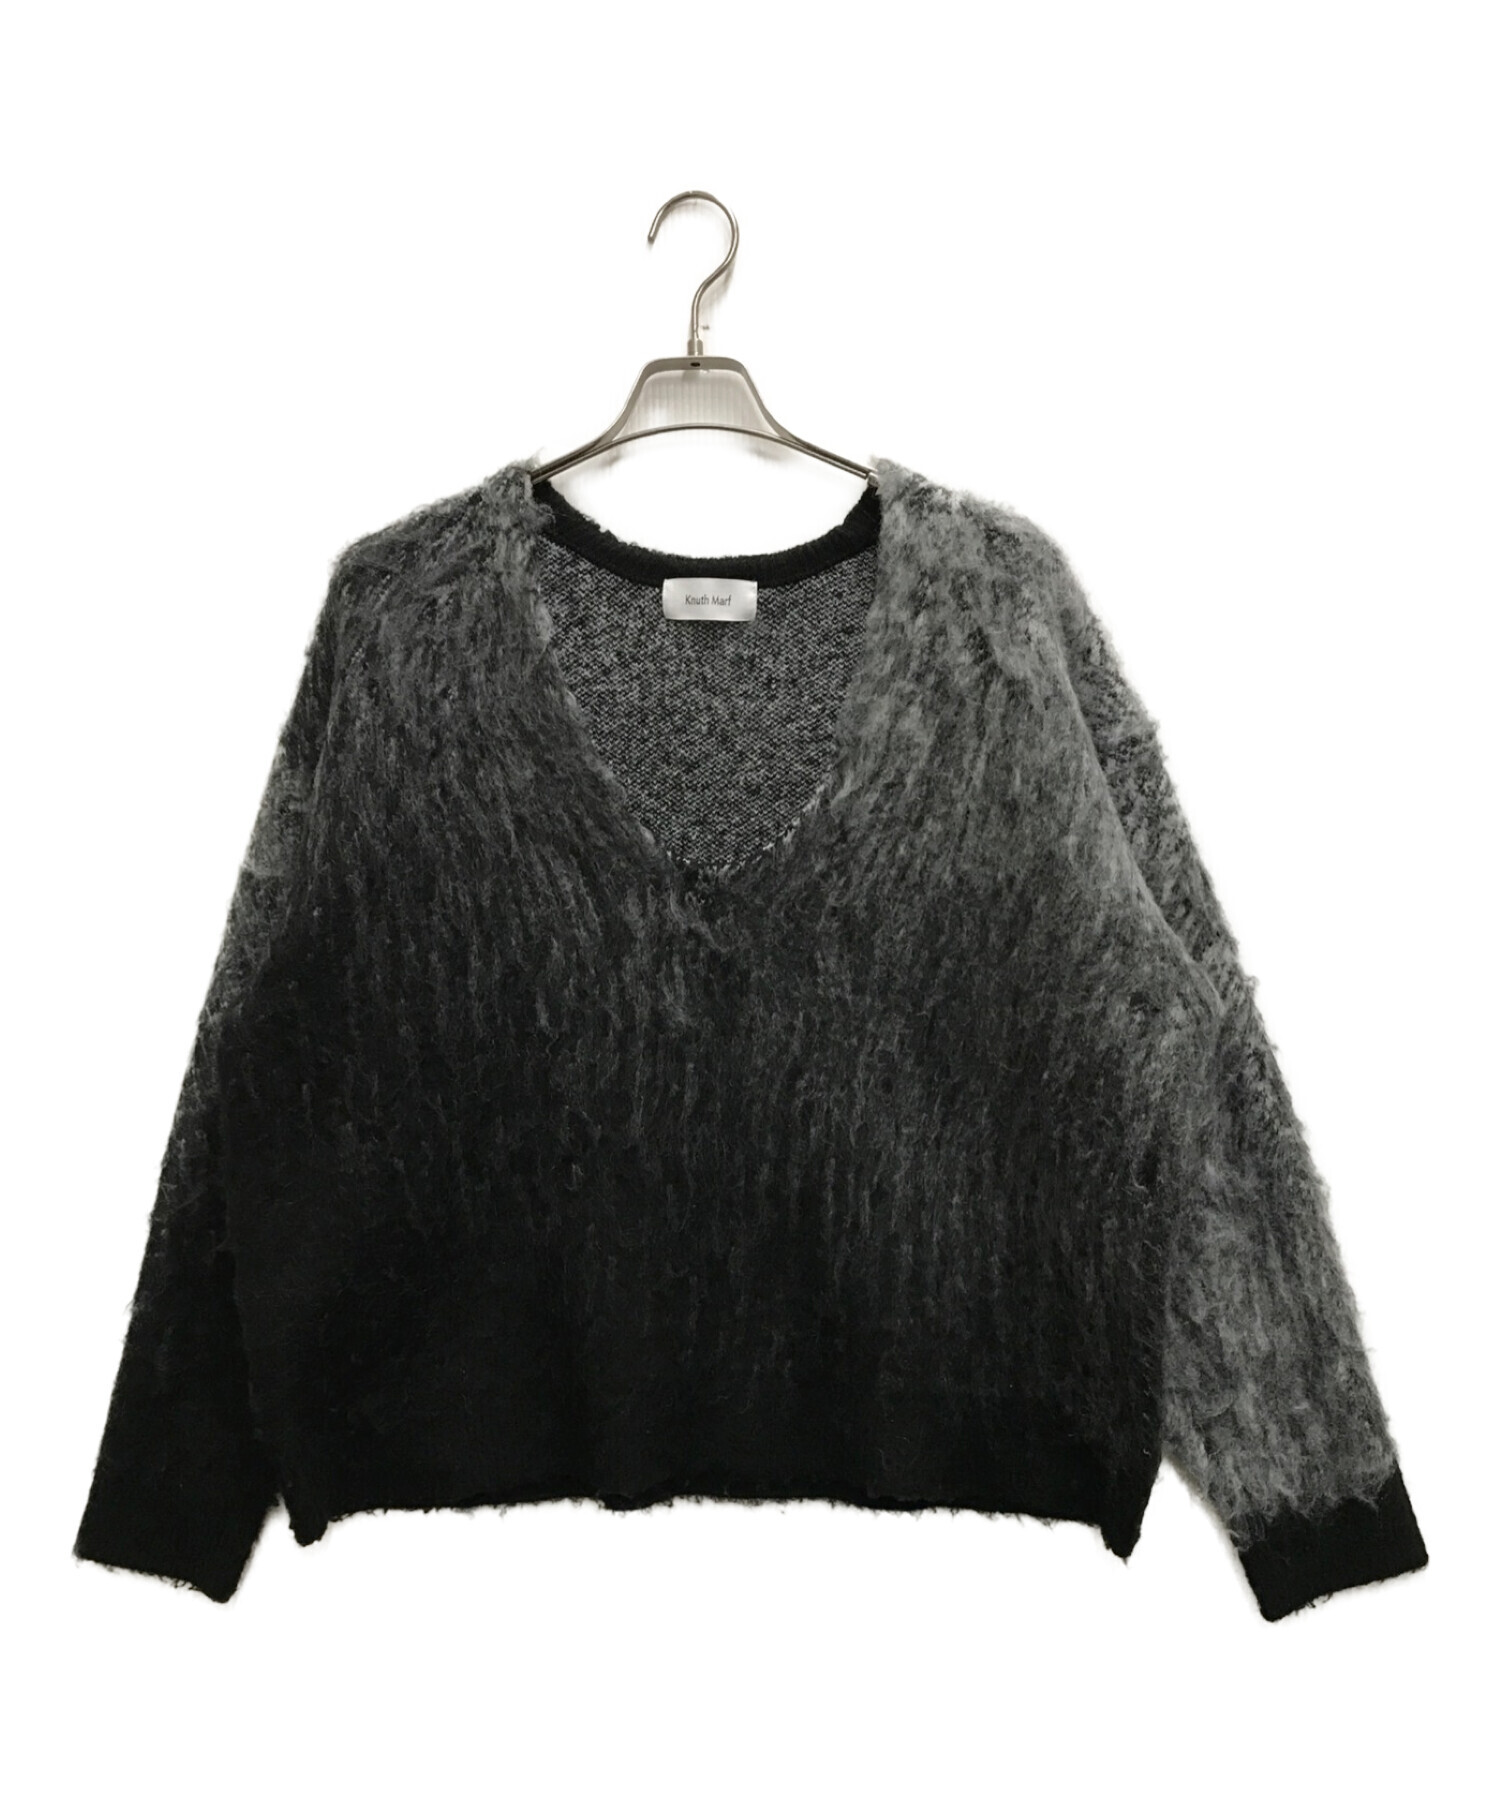 Knuth Marf (クヌースマーフ) Uneck knit pullover グレー サイズ:FREE